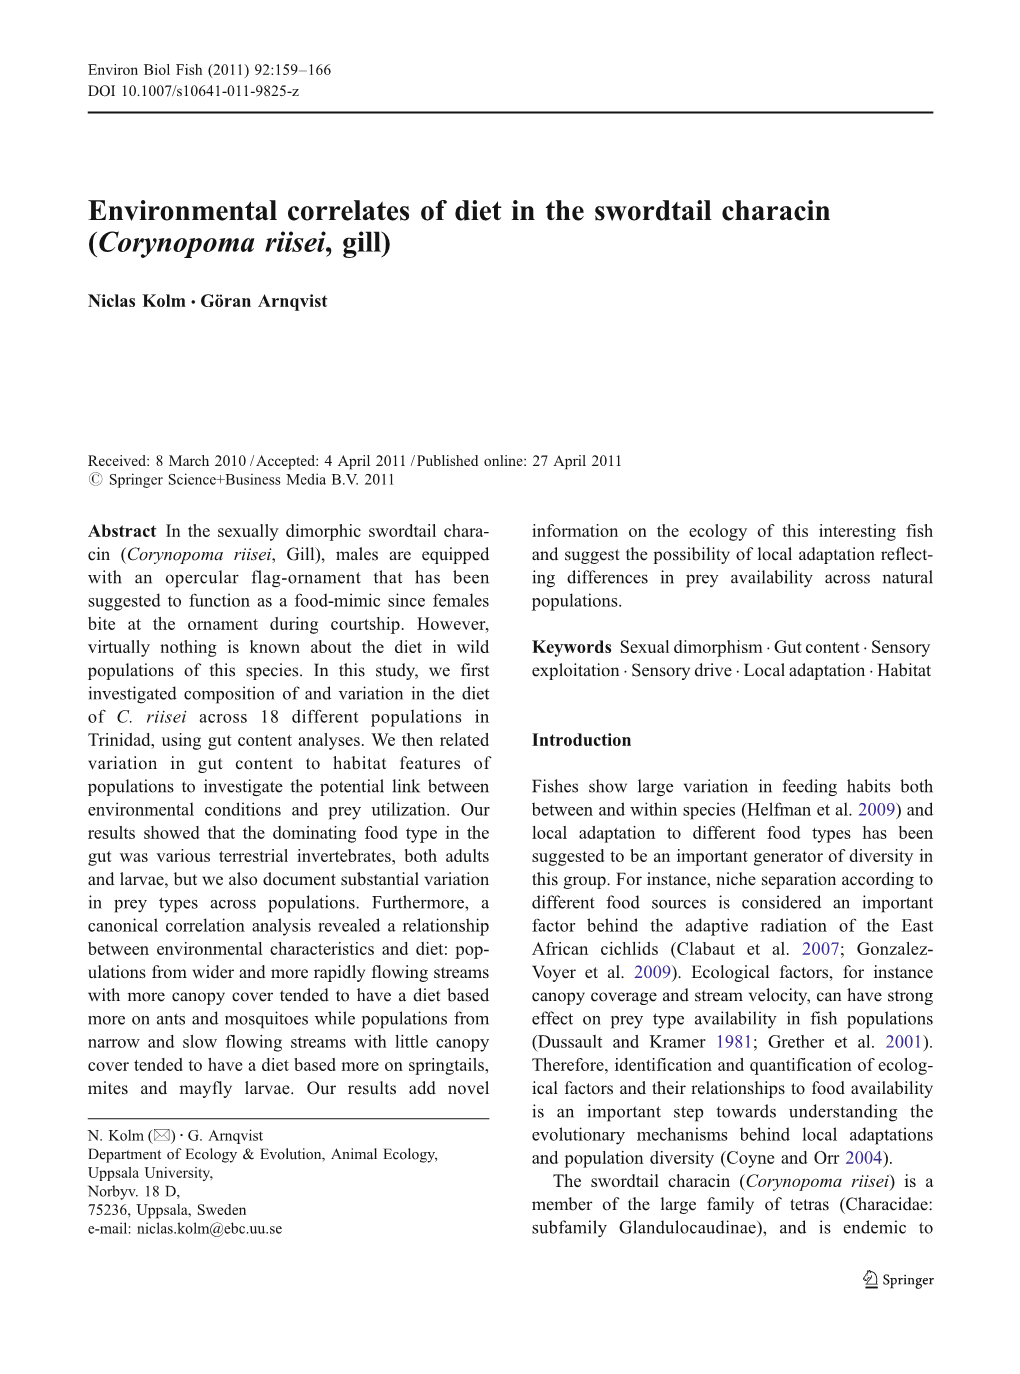 Environmental Correlates of Diet in the Swordtail Characin (Corynopoma Riisei, Gill)